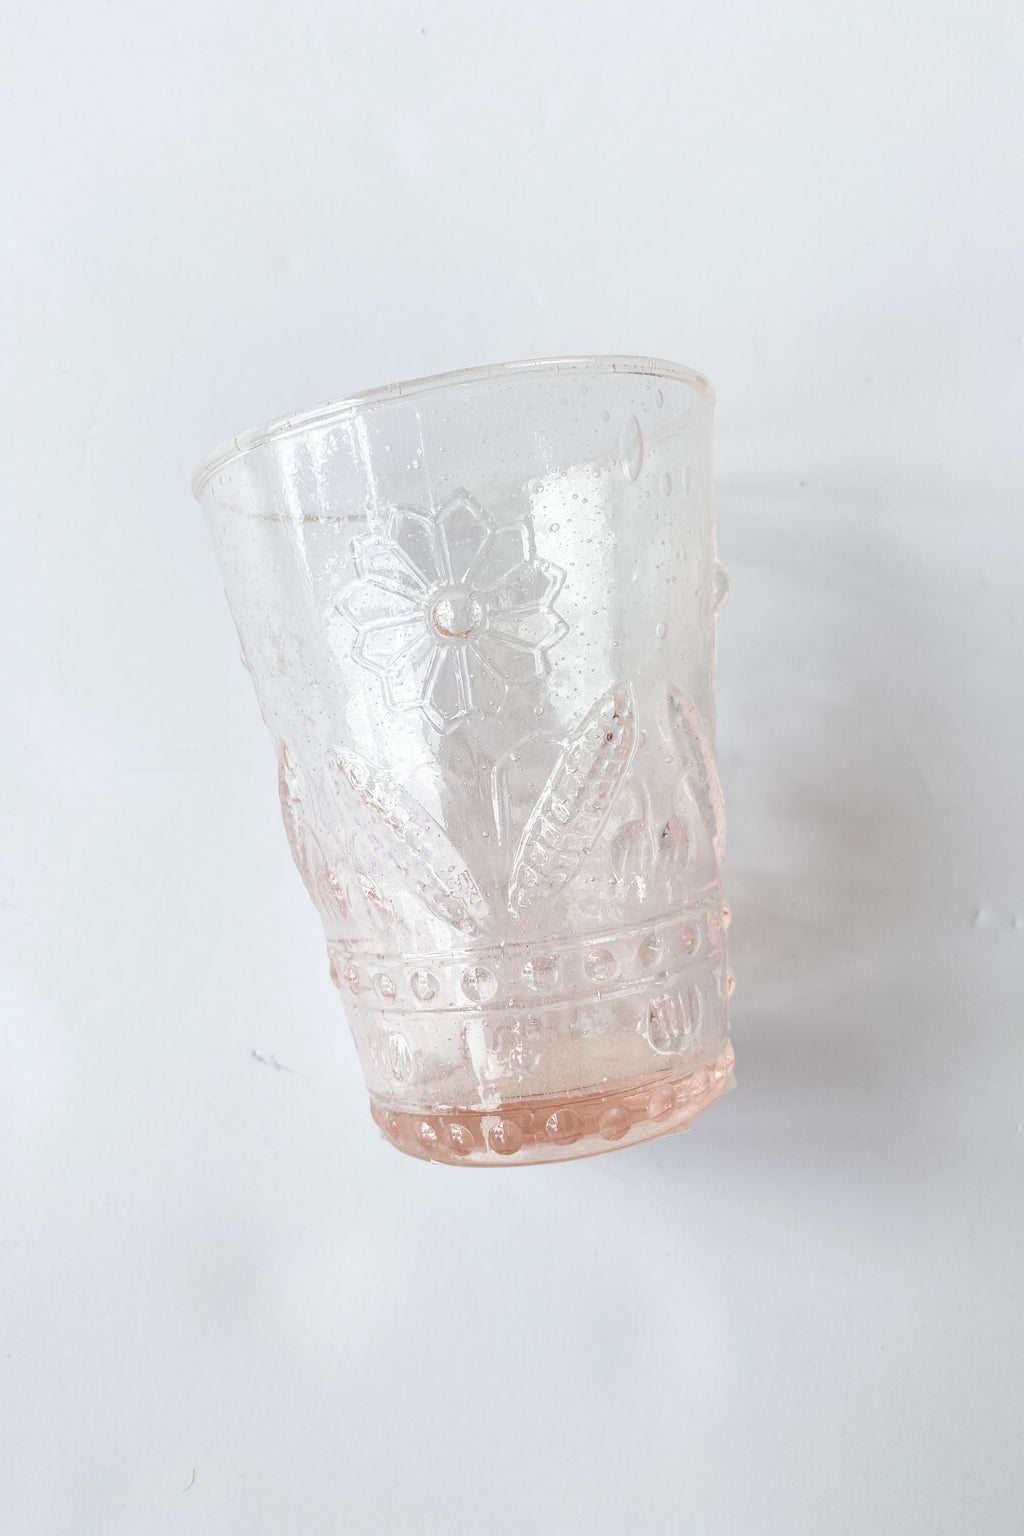 mode, pink embossed glass